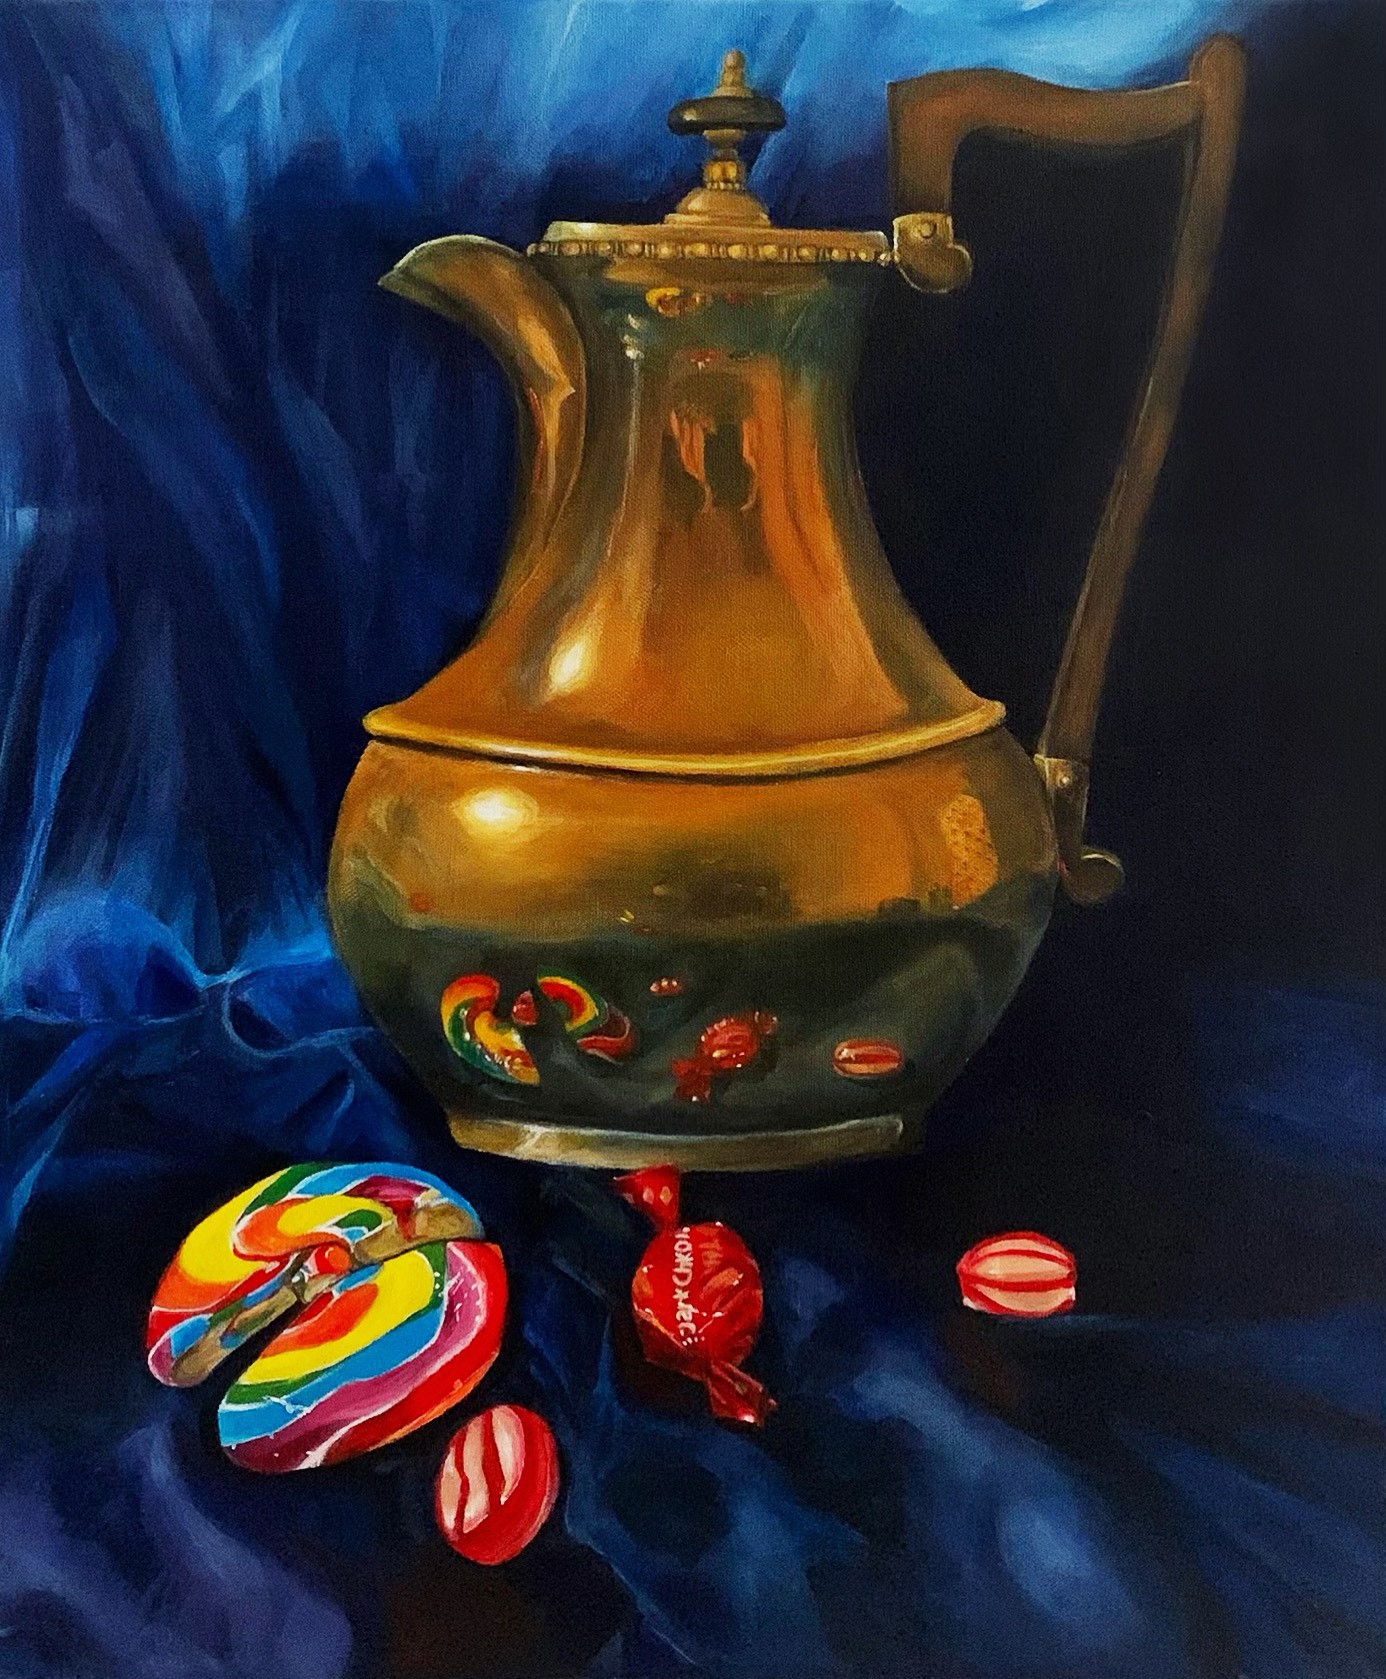 A golden teapot and candy on a blue background, creating a vibrant and enticing painting.